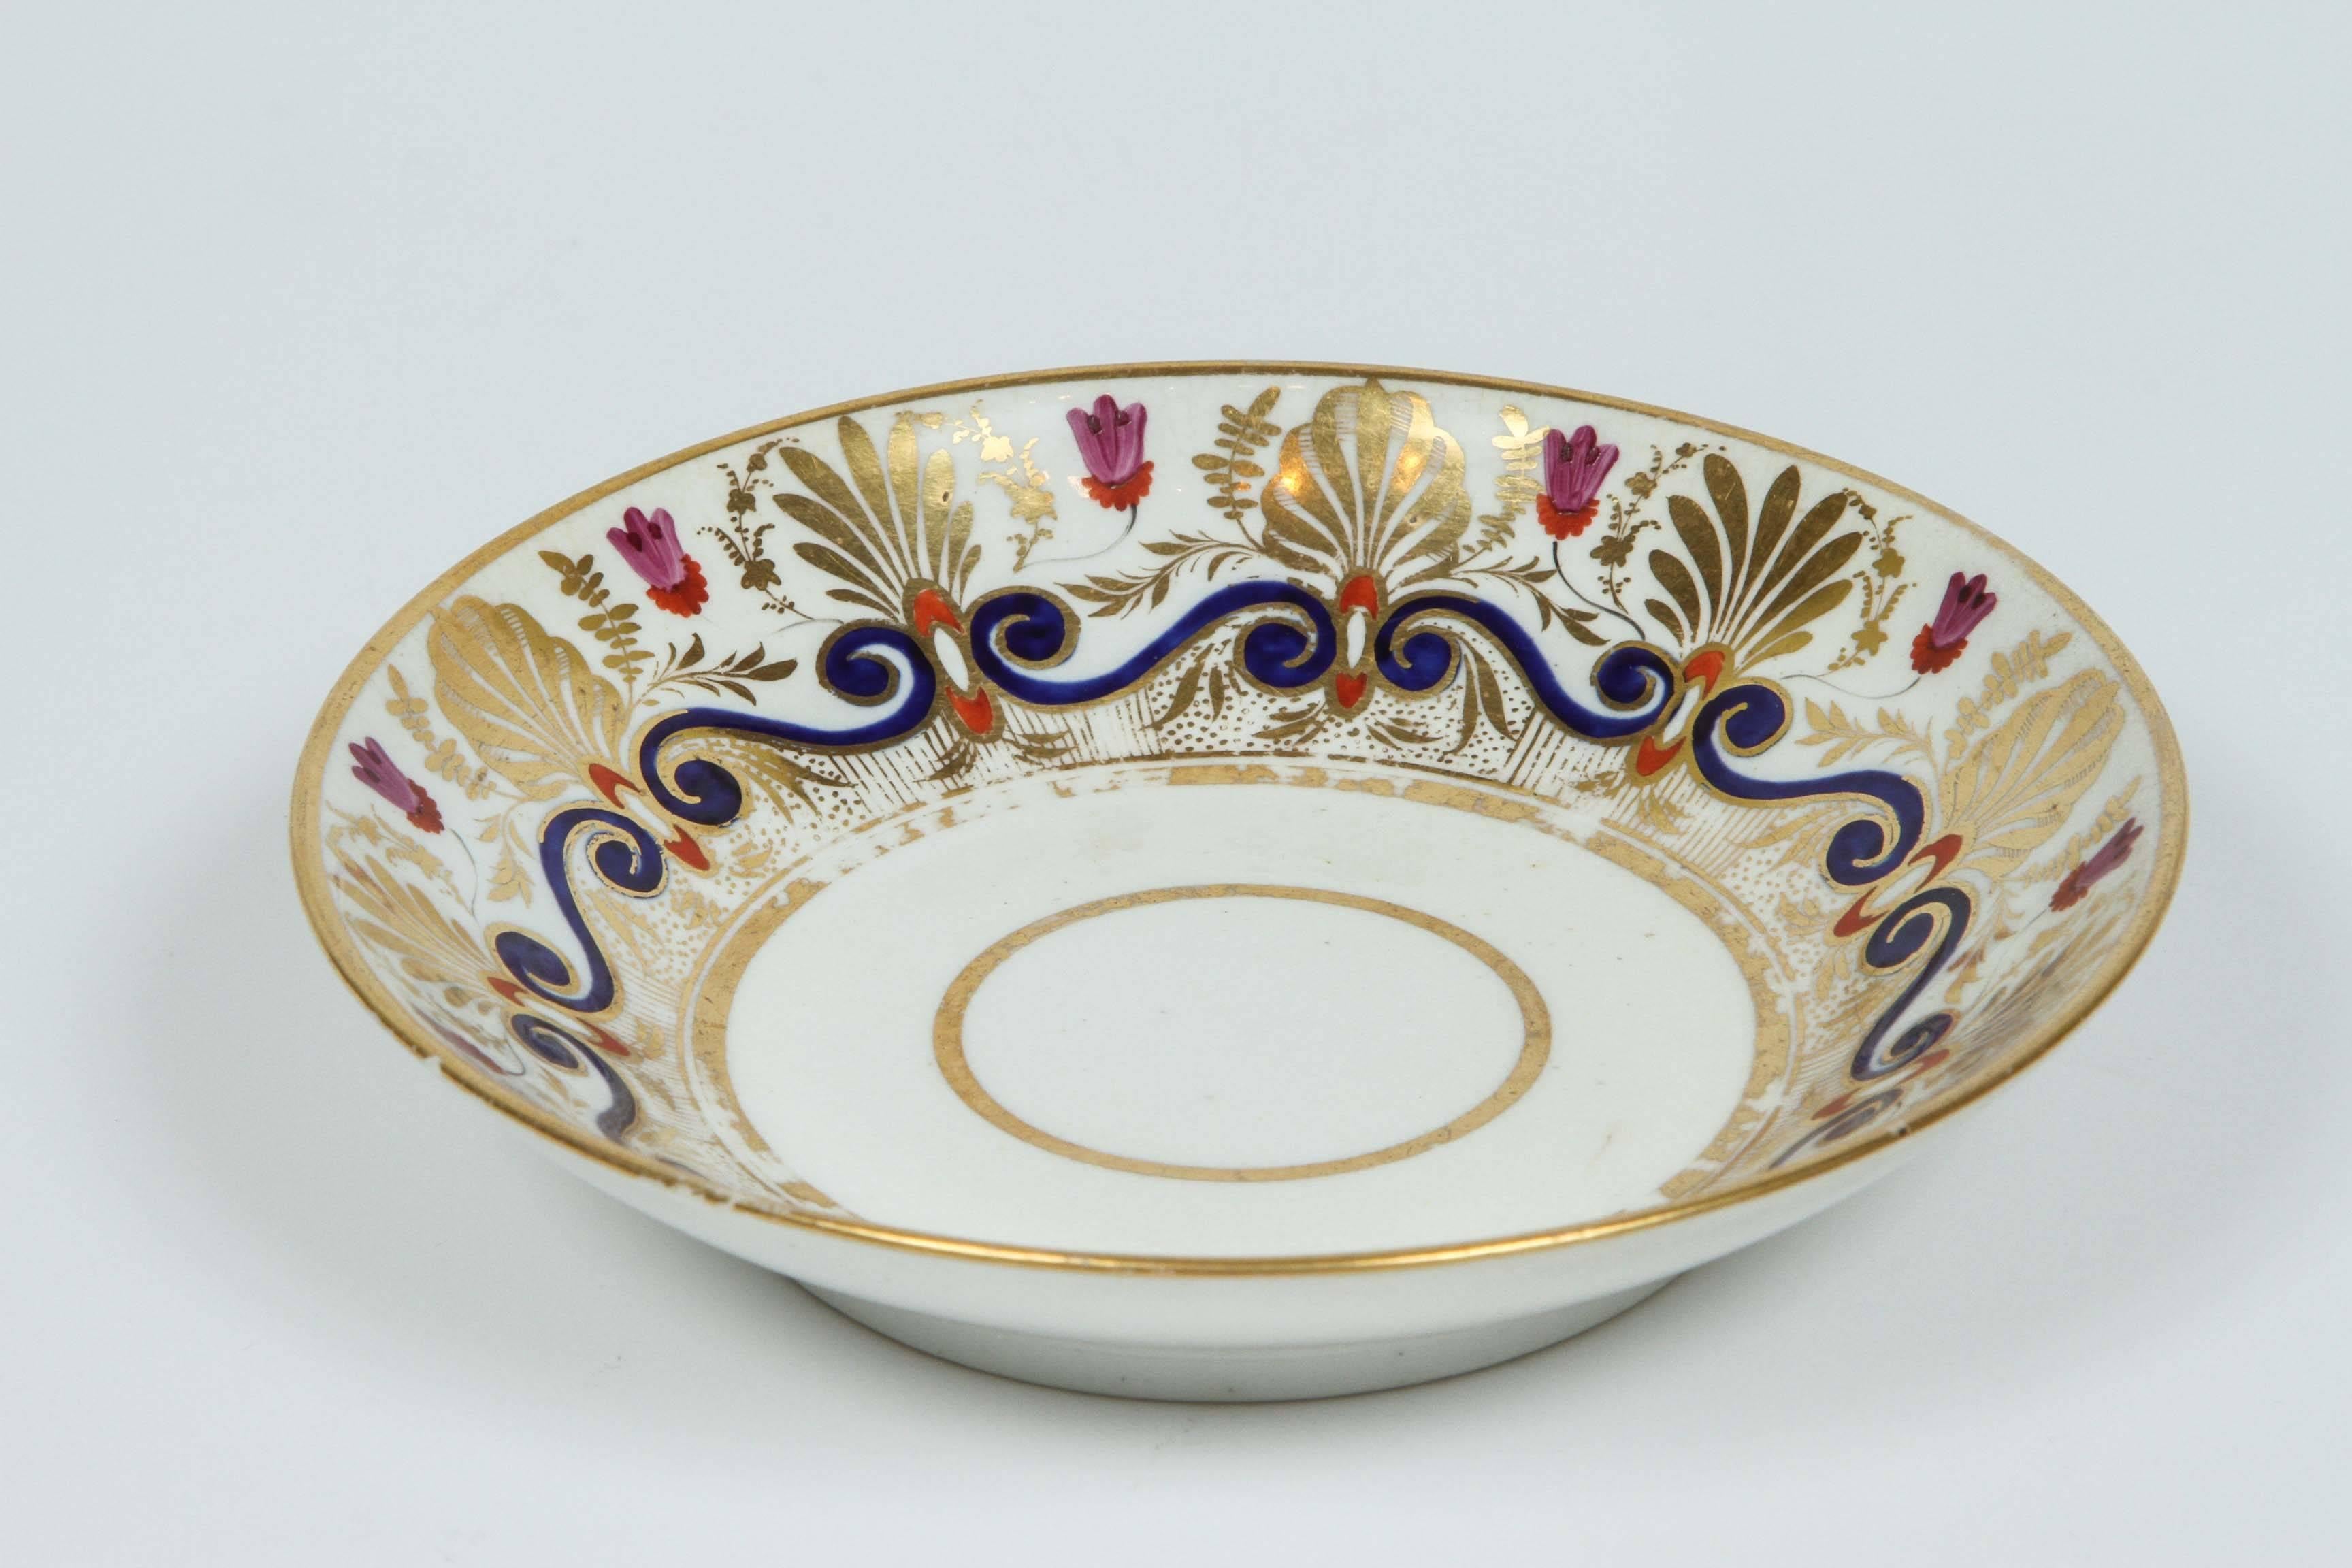 Regency English Derby Saucer with Gilt and Polychrome Decoration, circa 1815 For Sale